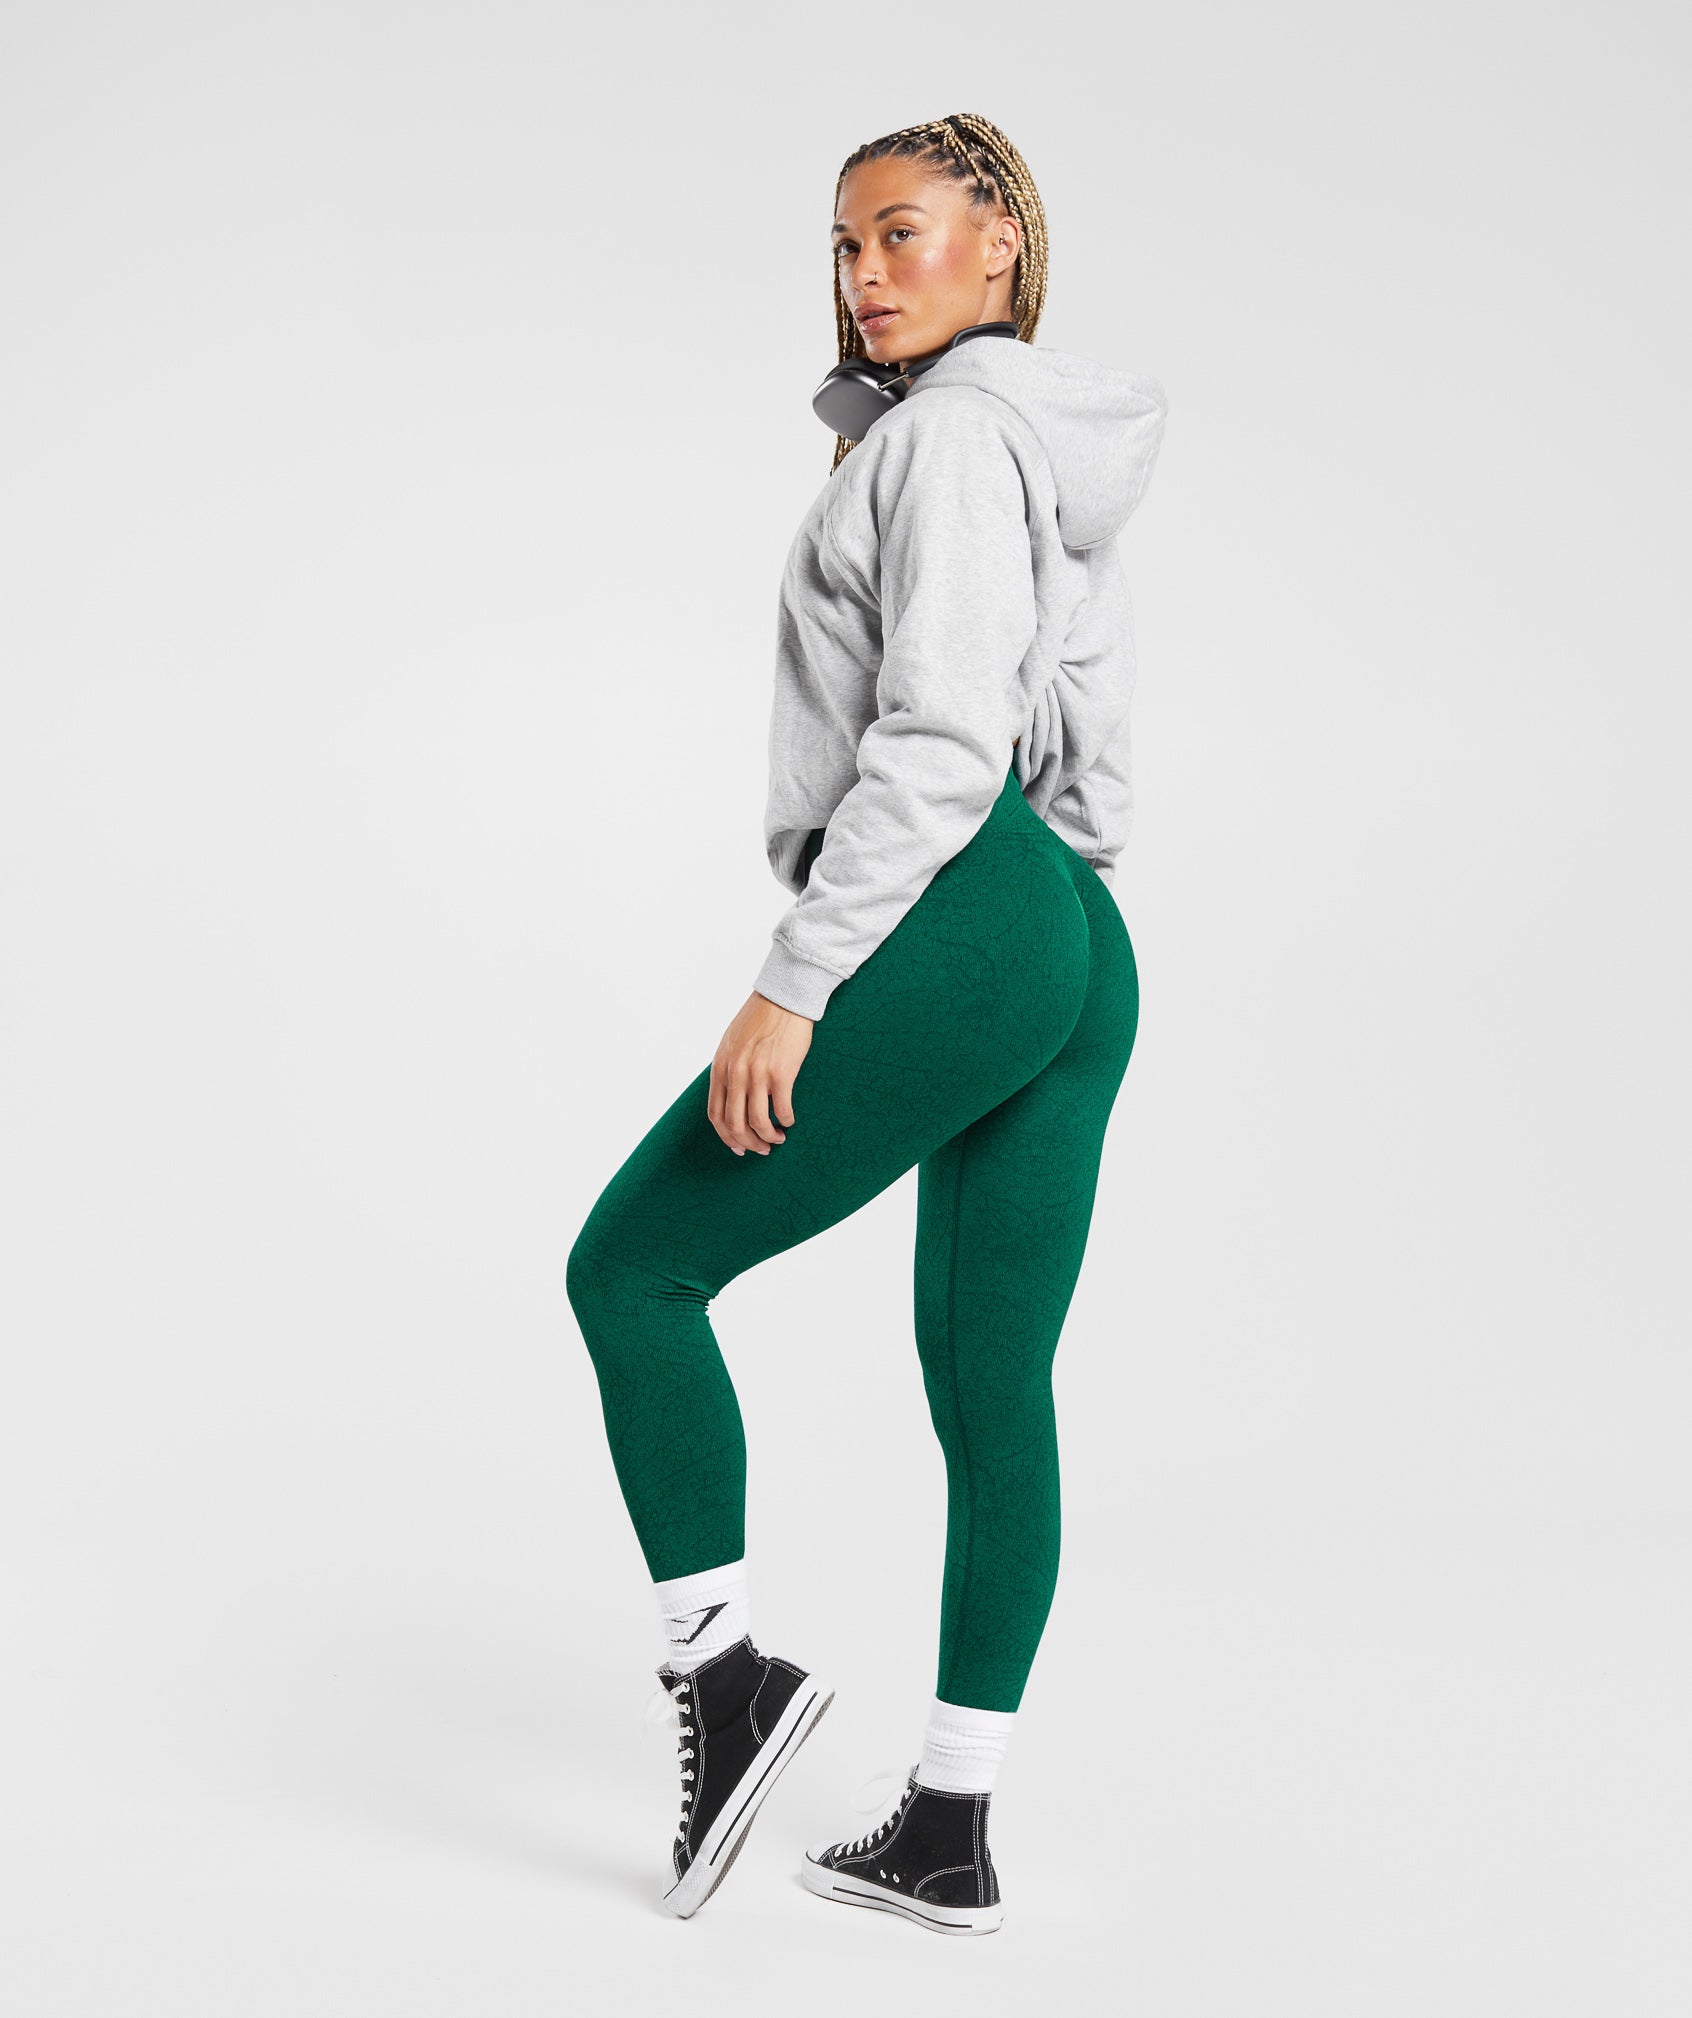 Adapt Pattern Seamless Leggings in Forest Green/Rich Green - view 4